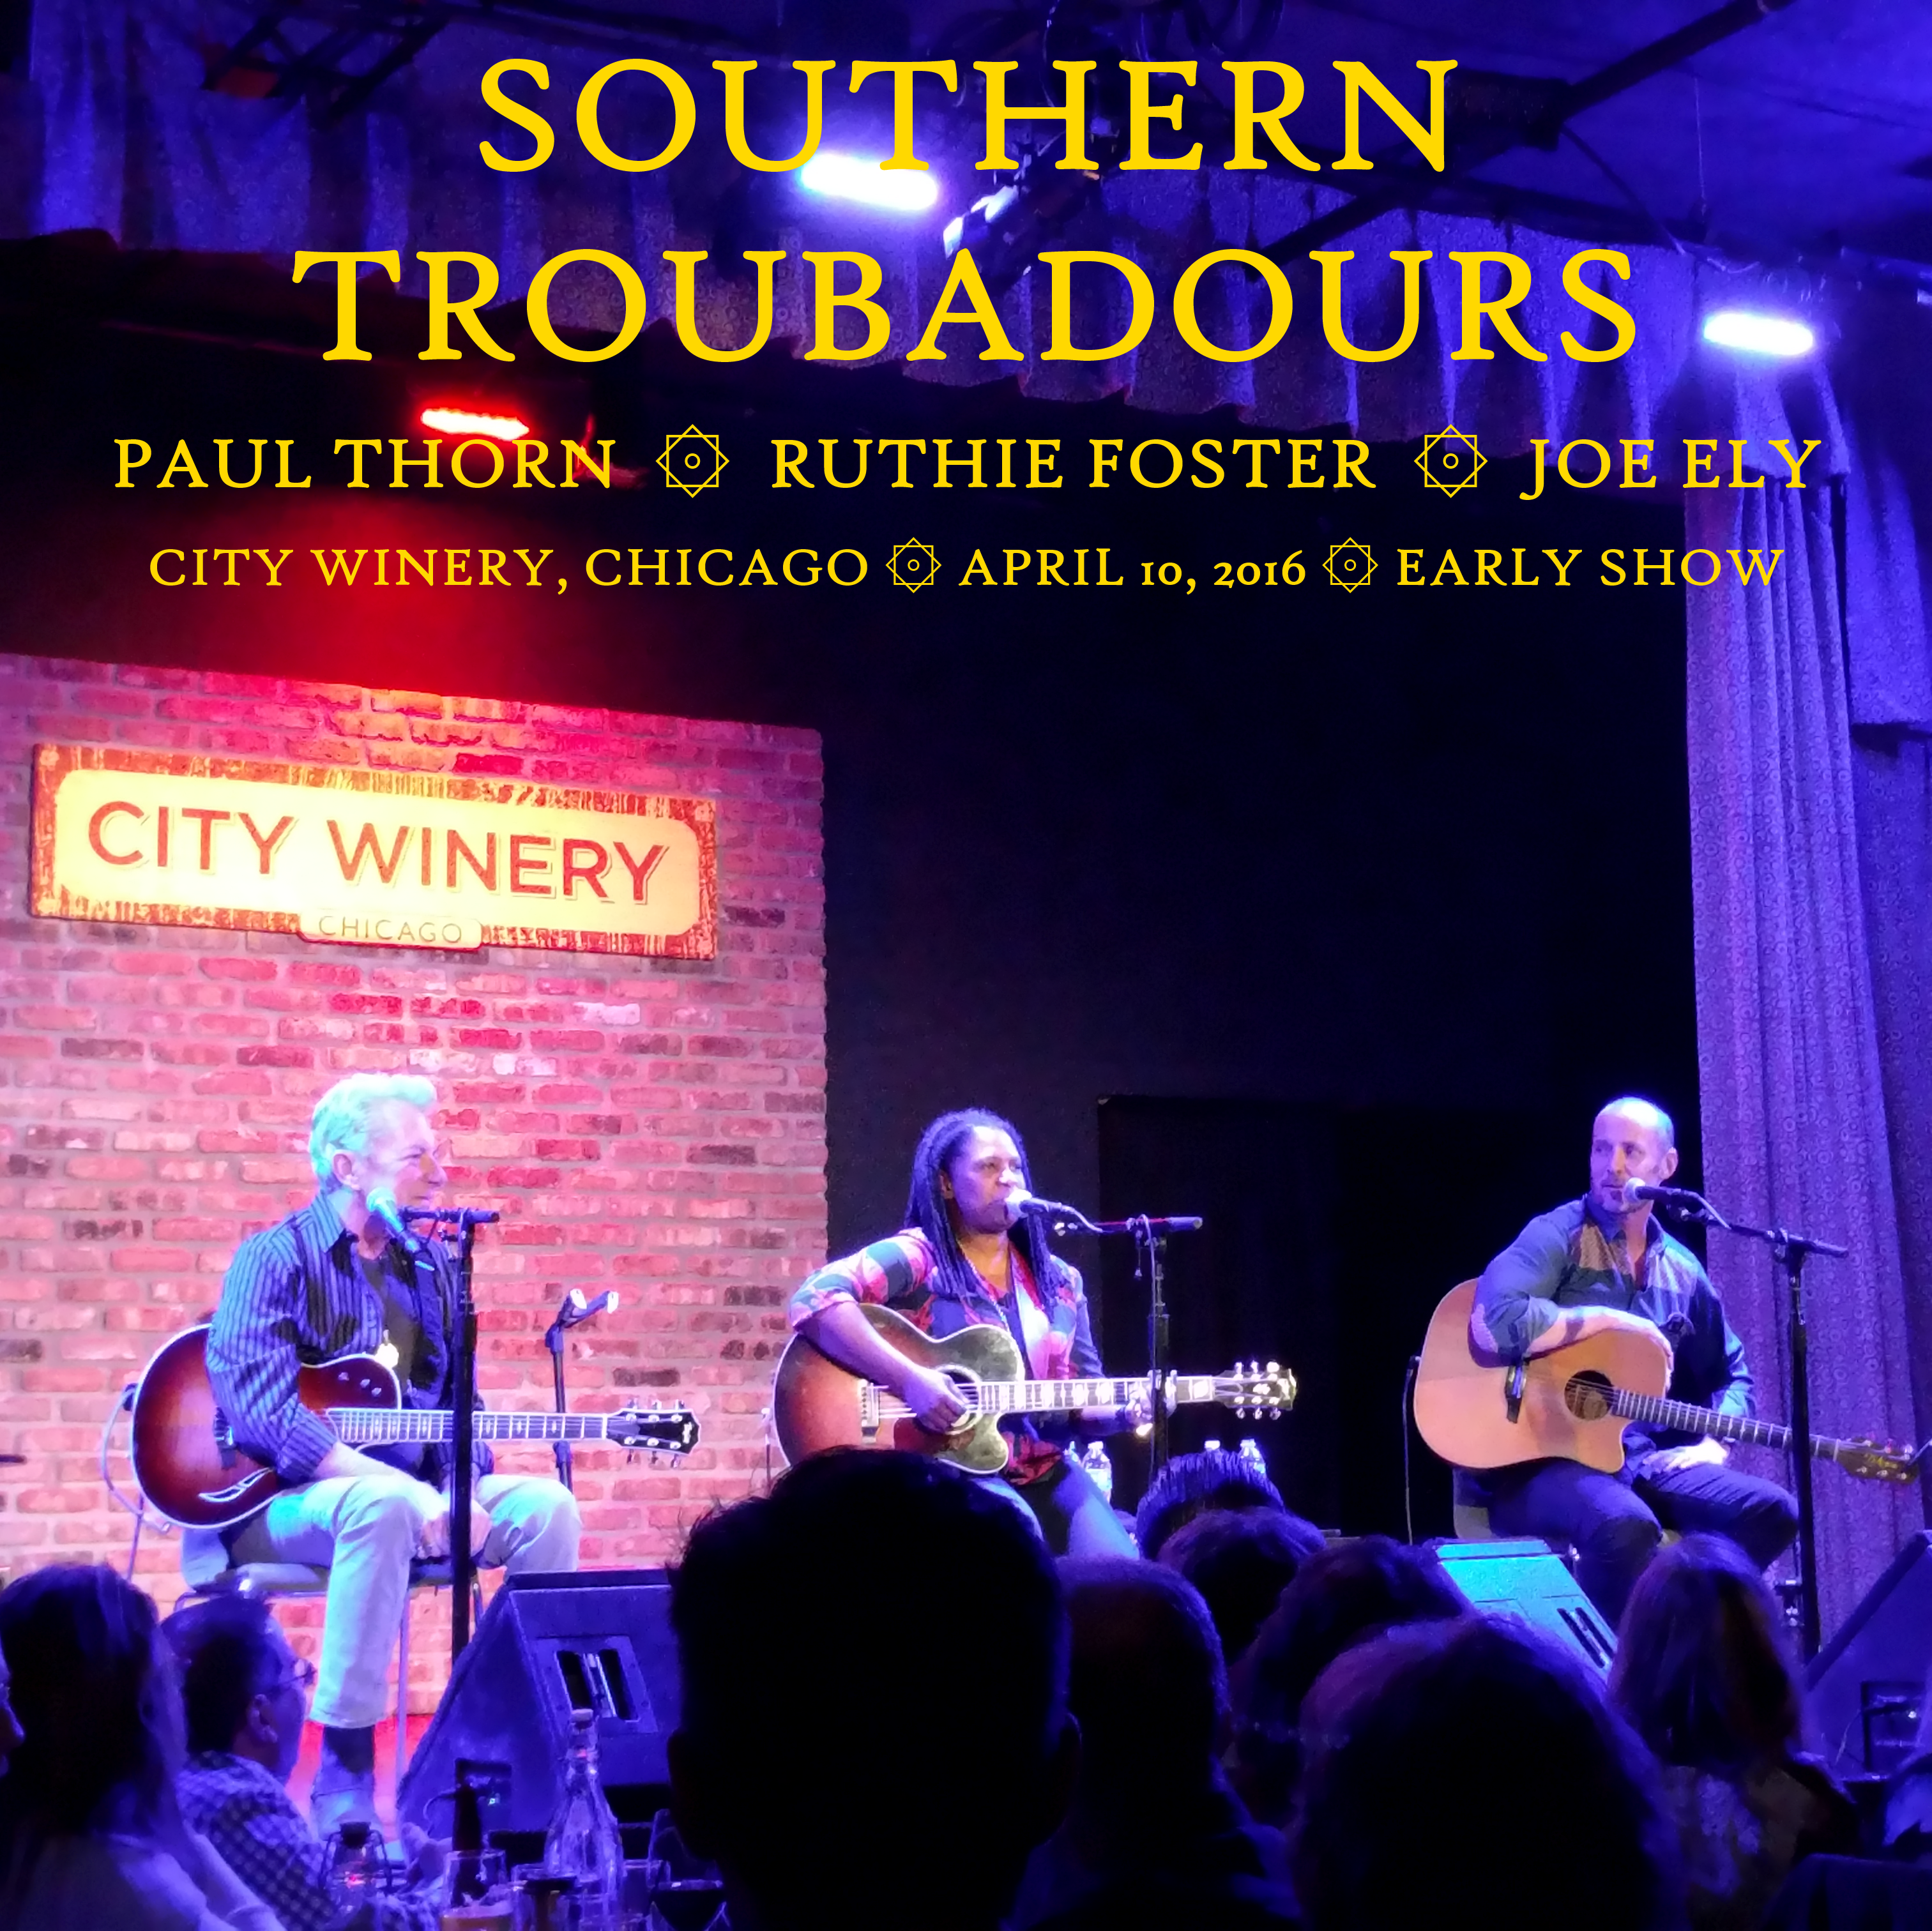 SouthernTroubadours2016-04-10CityWineryChicagoIL (3).png